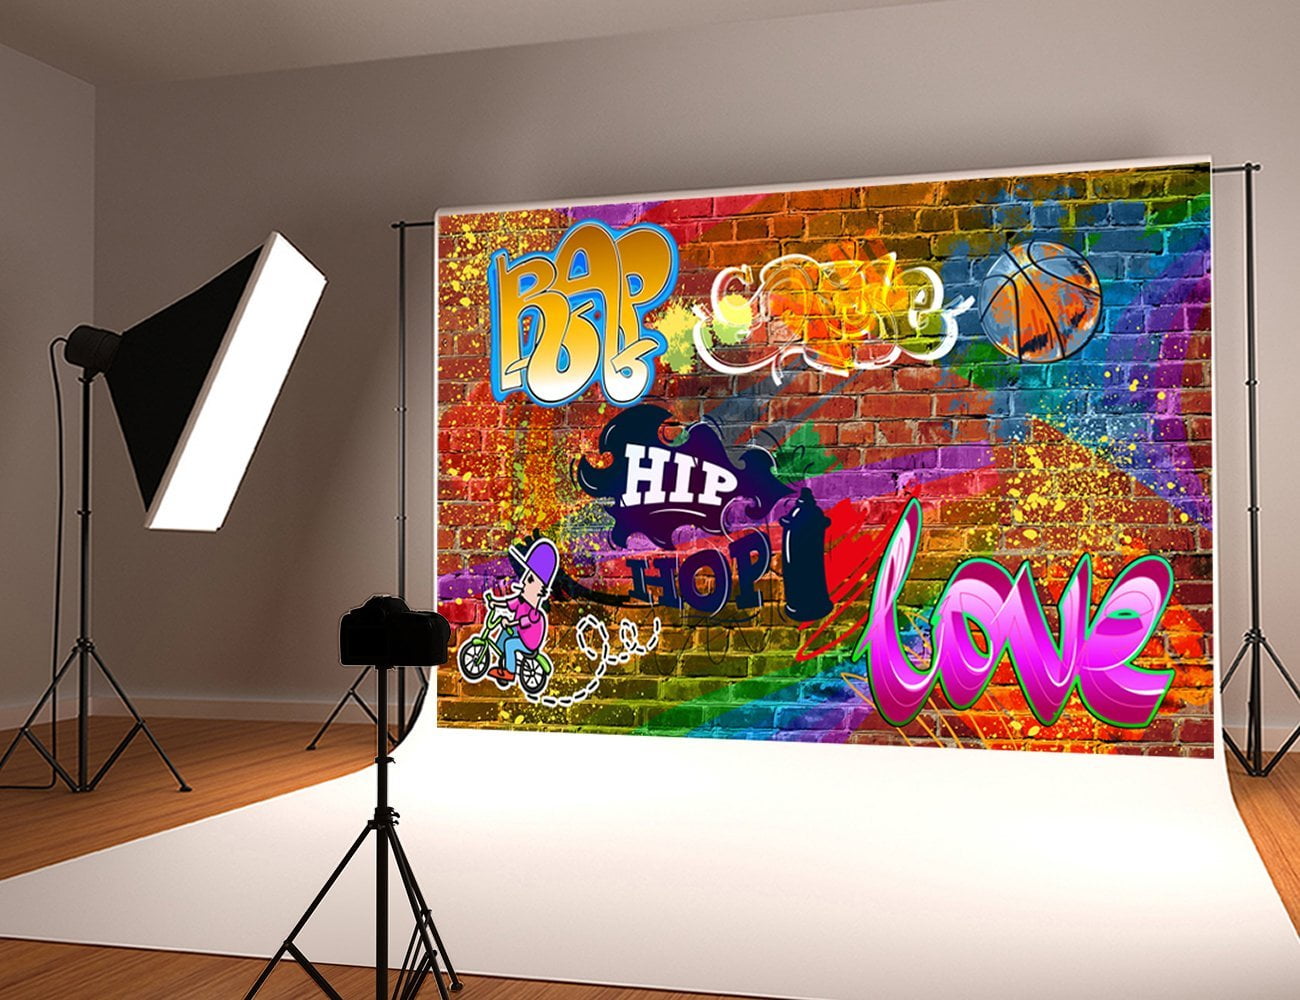 YEELE Graffiti Stairs Backdrop 10x8ft Colorful Brick Wall in City Street Photography Background Fashion Chic Art Room Decoration Kids Adults Artistic Portrait YouTube Videos Photoshoot Props Wallpaper